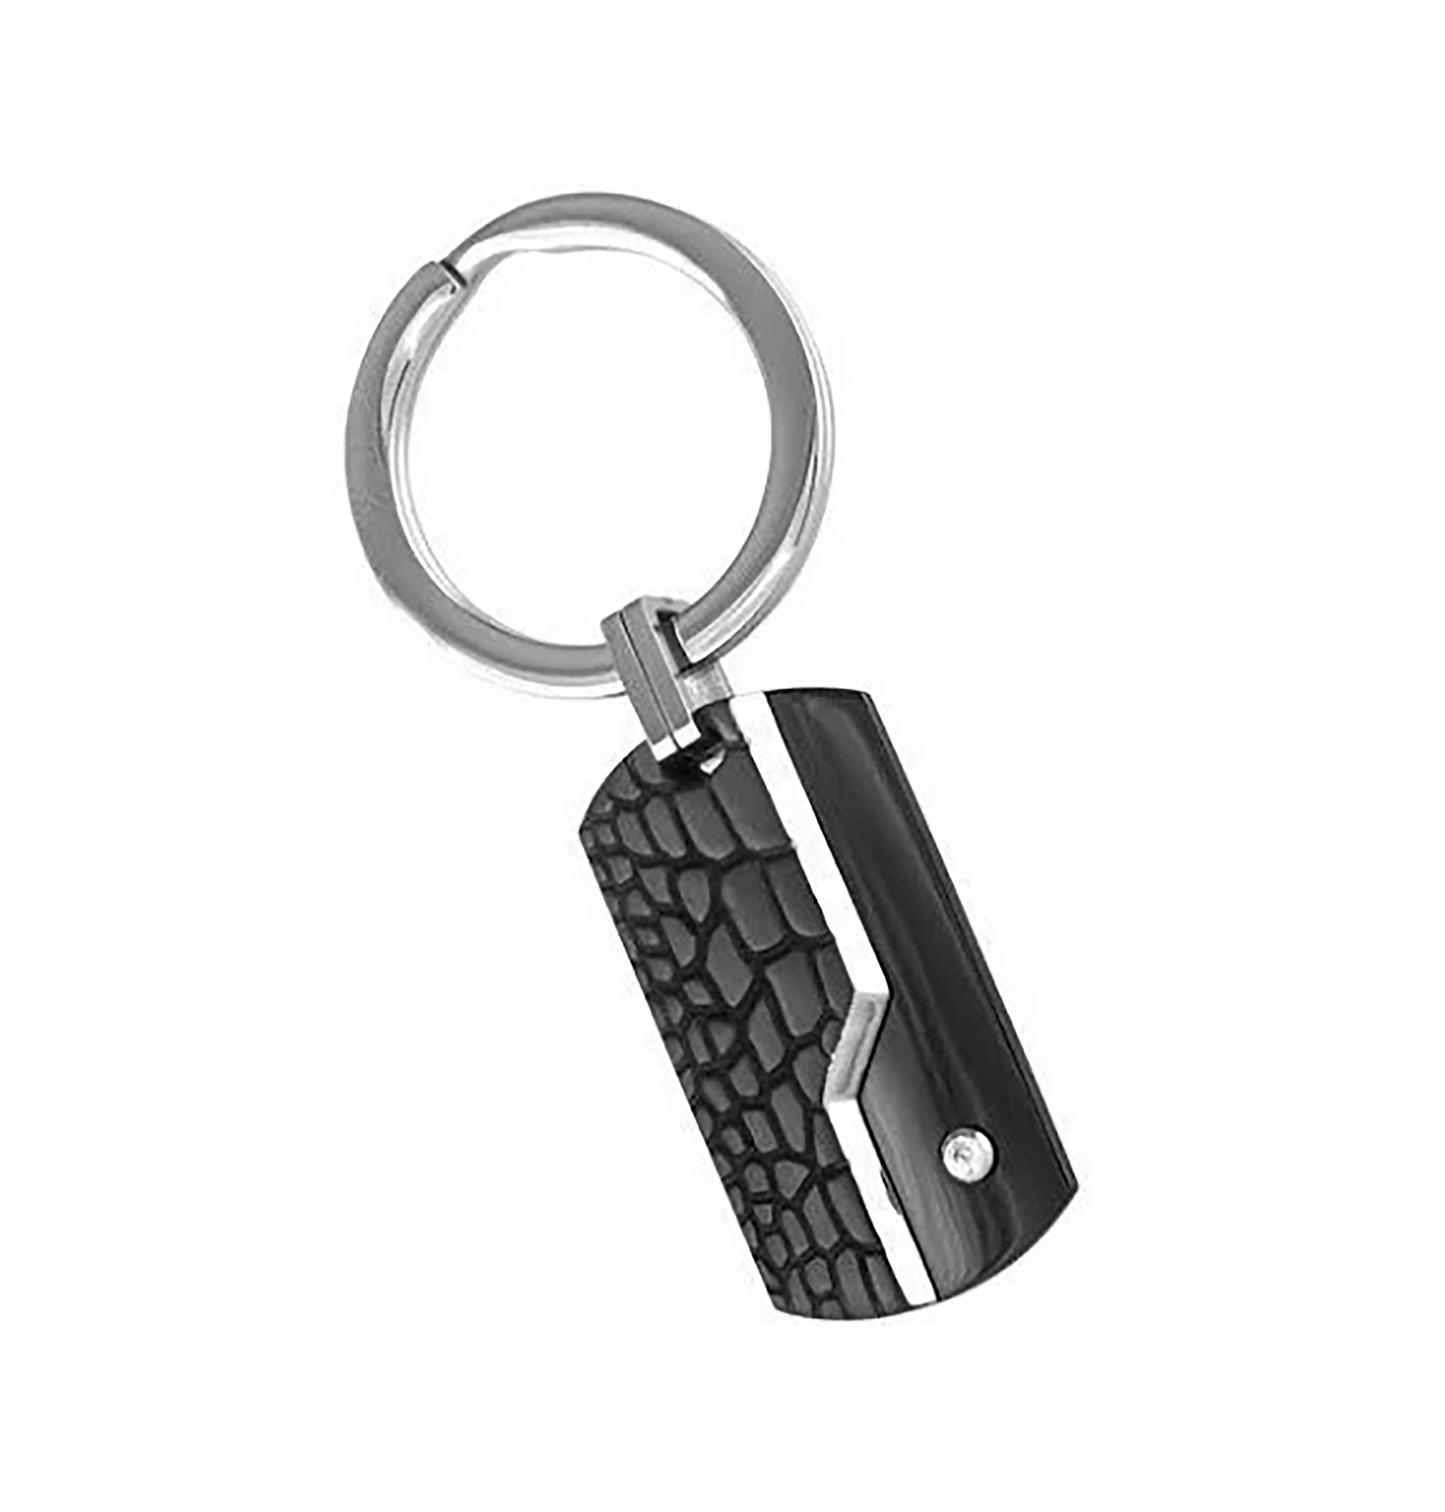 Black Steel Polished Reptile Scaled Design Key Ring by ARZ STEEL